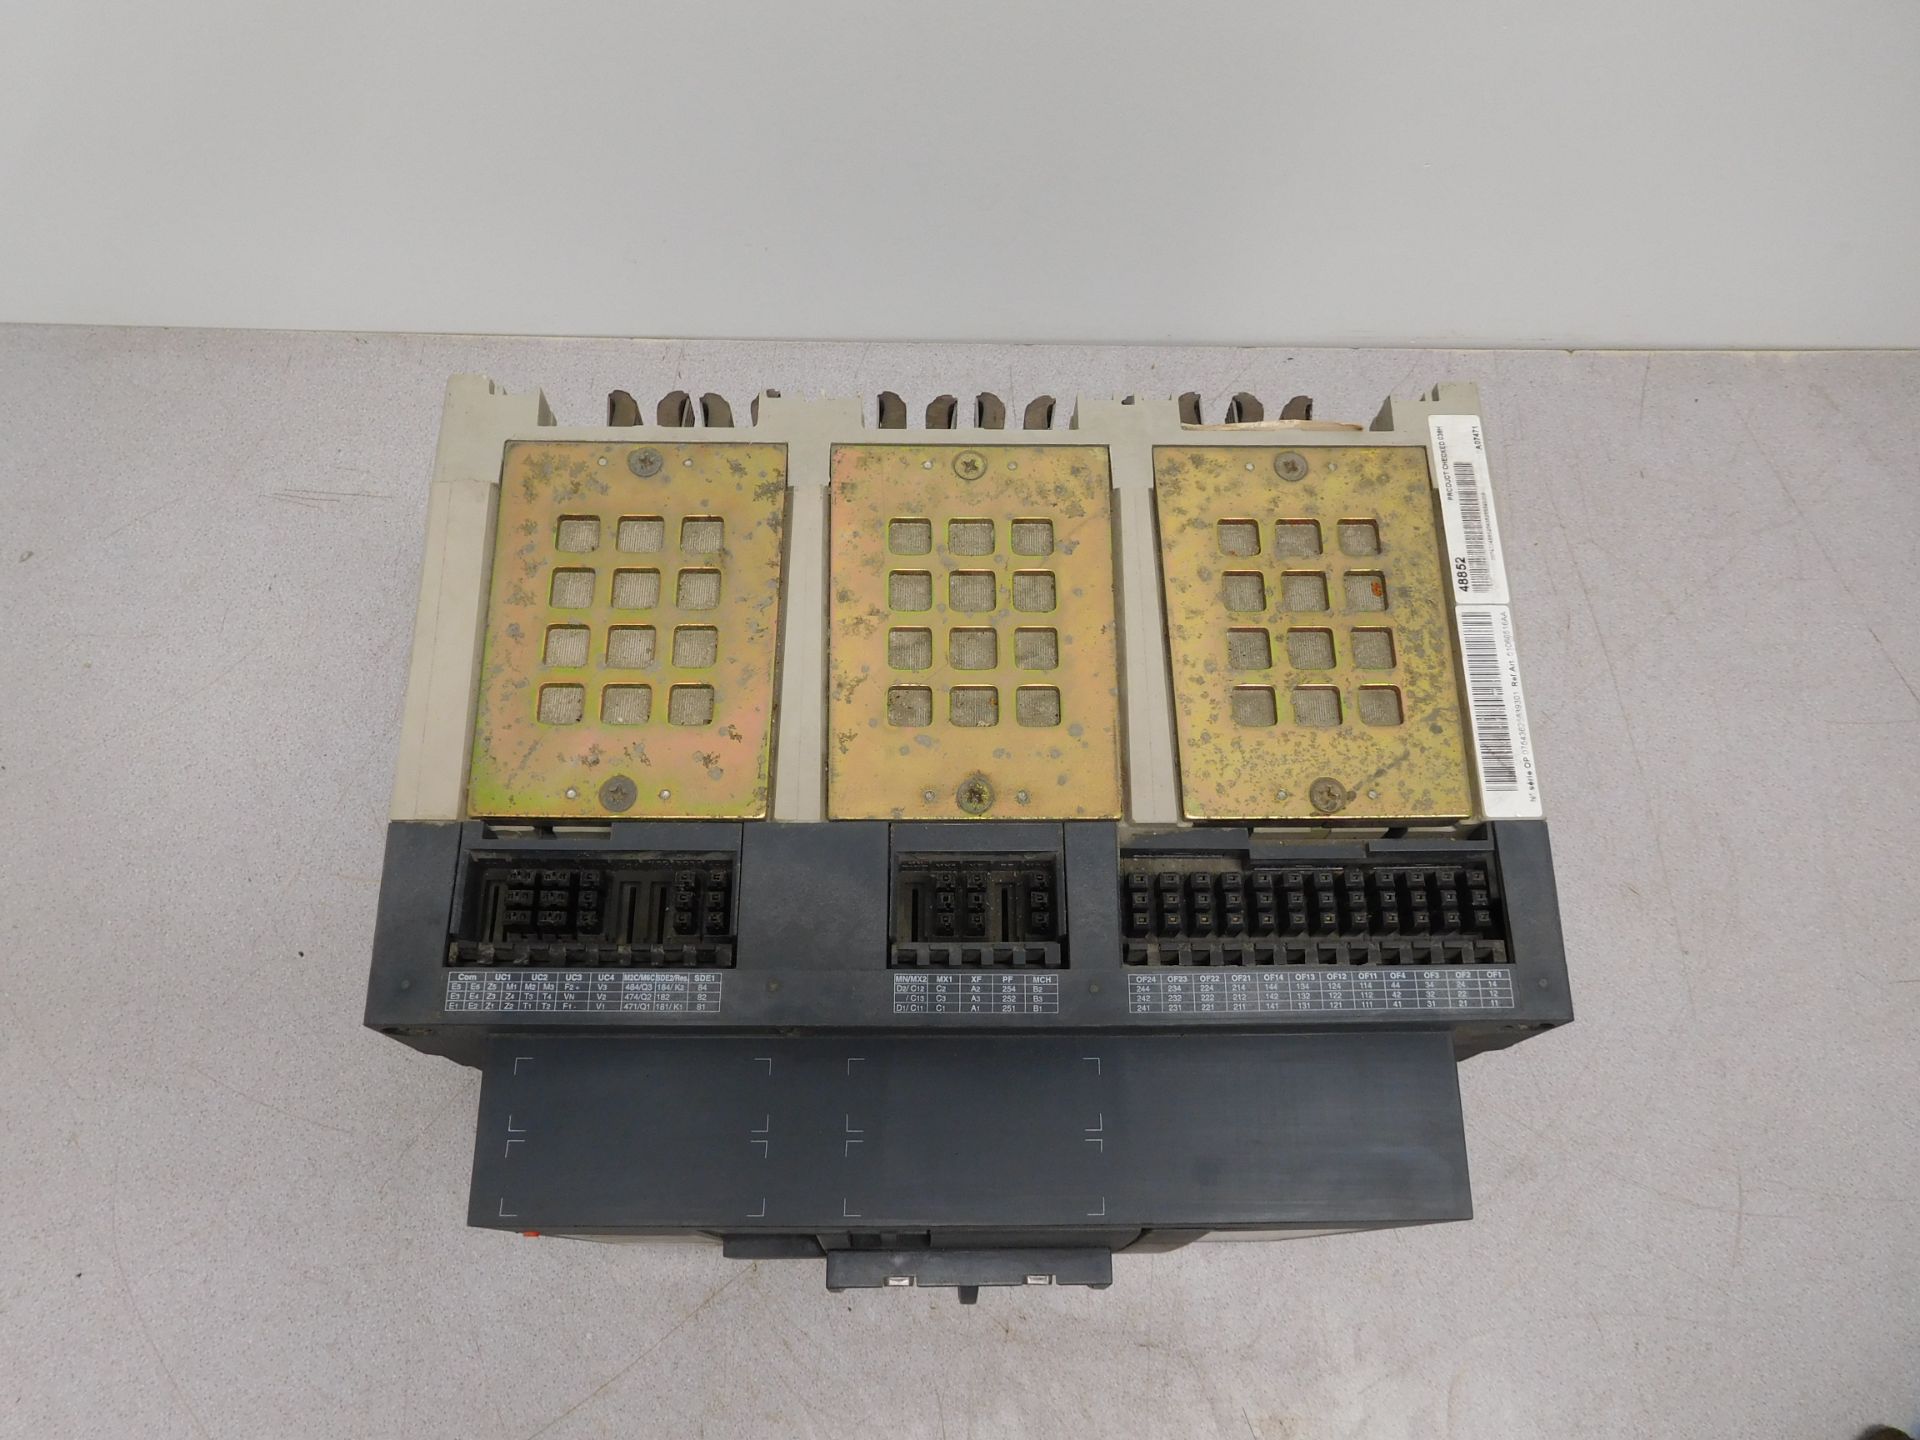 Square D NW 16 N1 Masterpact 1600 Amp Low-Voltage Power Circuit Breaker - Image 4 of 7